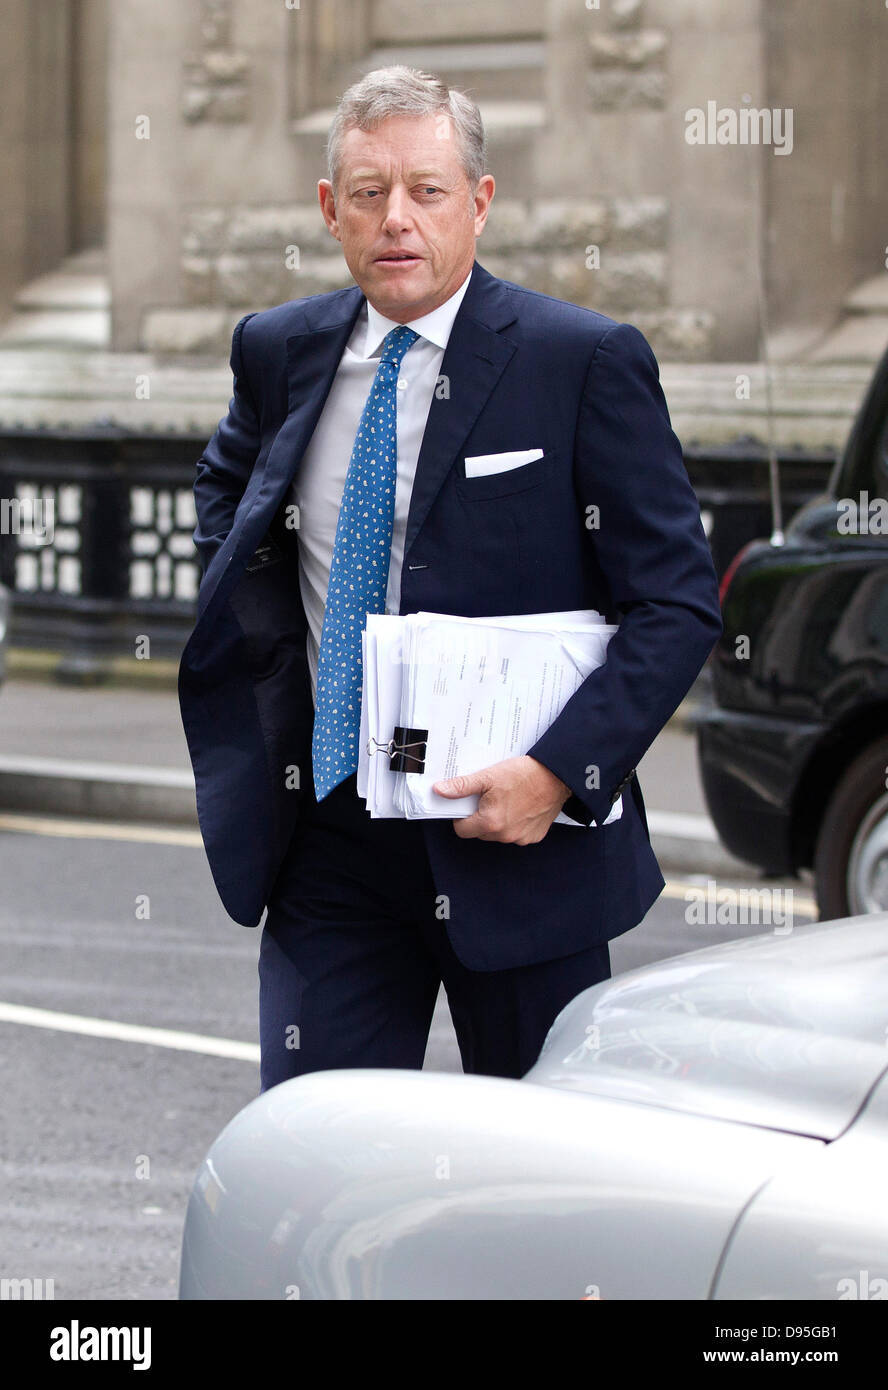 Rolls Building, London, UK. 12th June, 2013.  Picture shows Alexander Vik arriving at the Rolls Building, London where he suing Deutsche Bank over $8 Billion fund losses dating back to 2008. Stock Photo